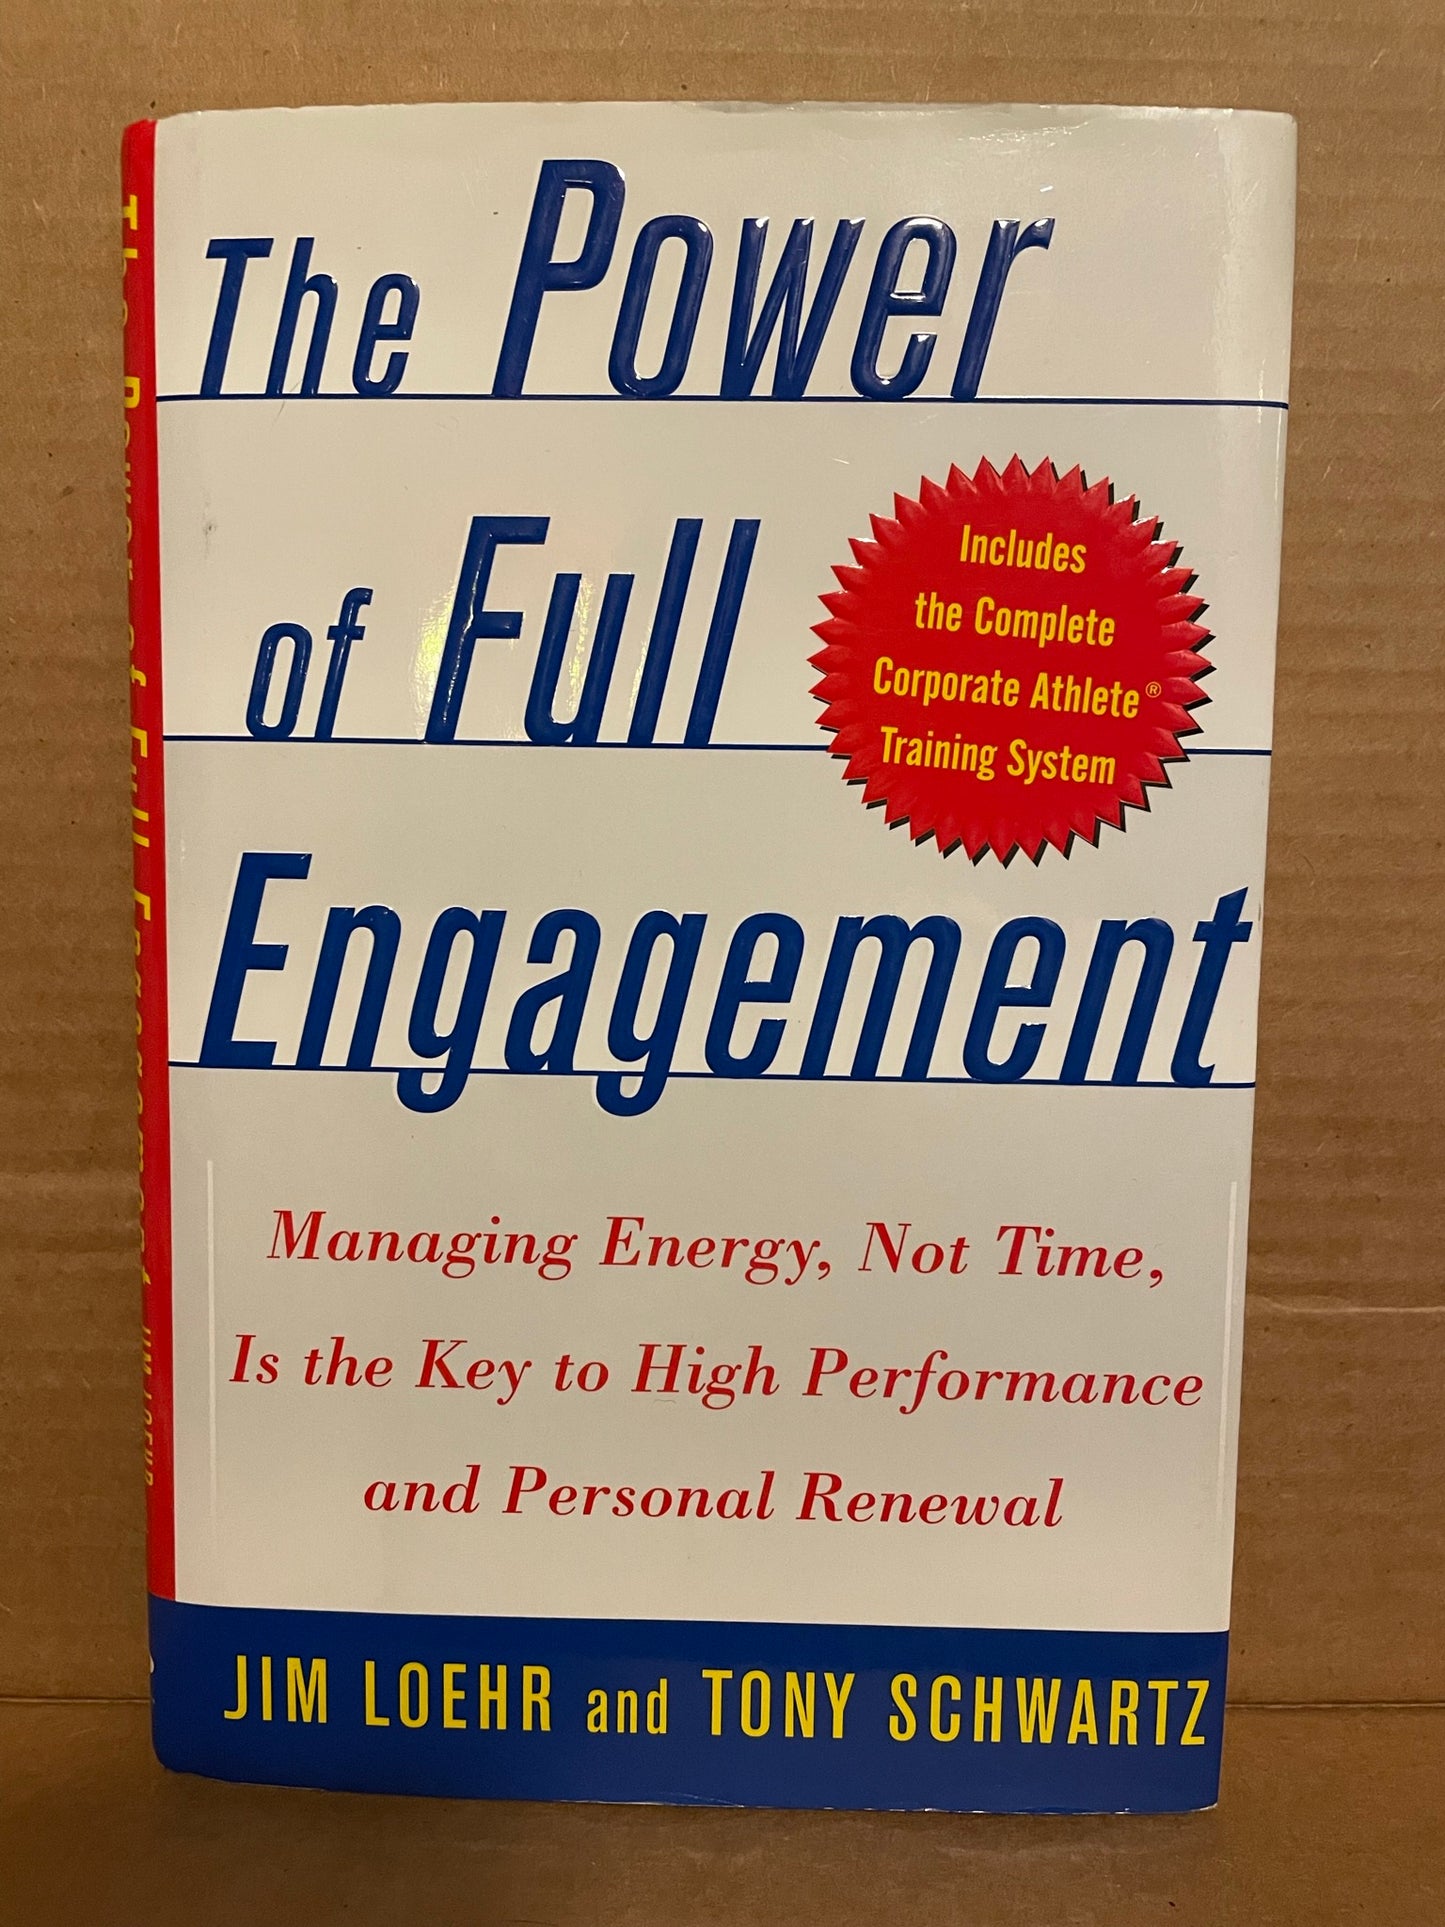 Loehr, Jim and Schwartz, Tony: The Power of Full Engagement - Managing Energy, Not Time, Is the Key to High Performance and Personal Renewal